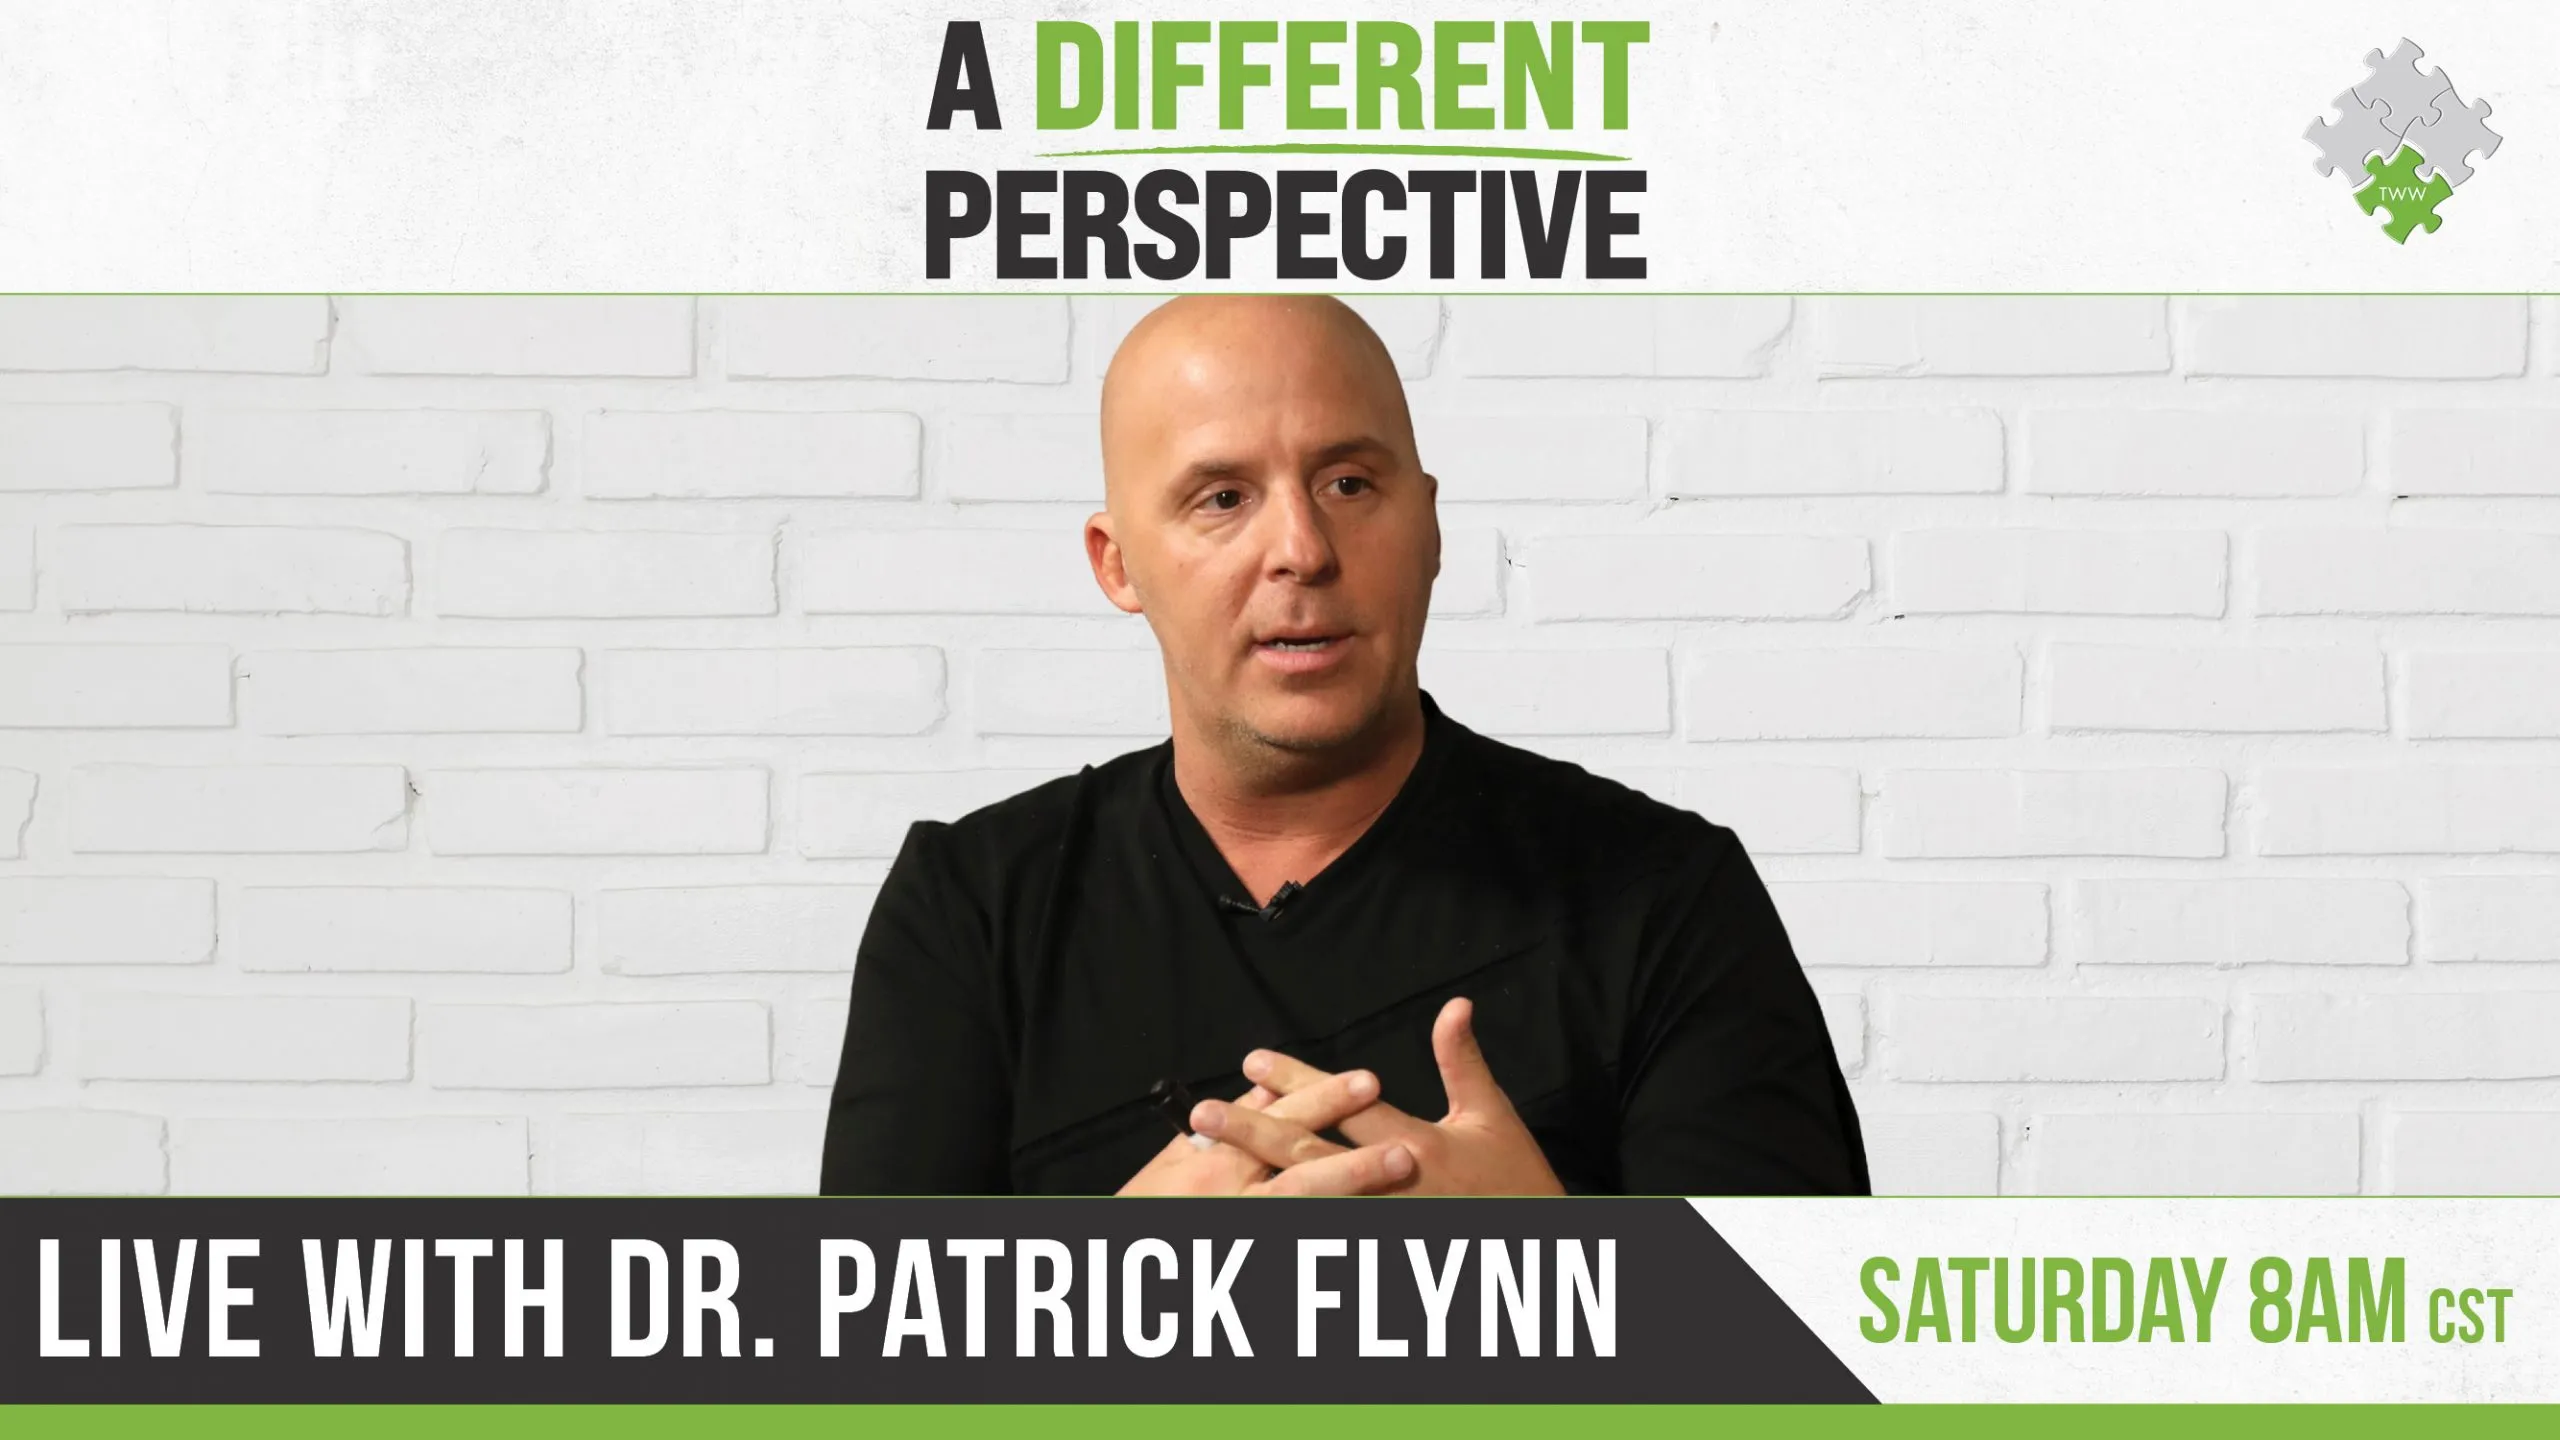 10.16.21 – “A Different Perspective with Dr. Patrick Flynn” Recap